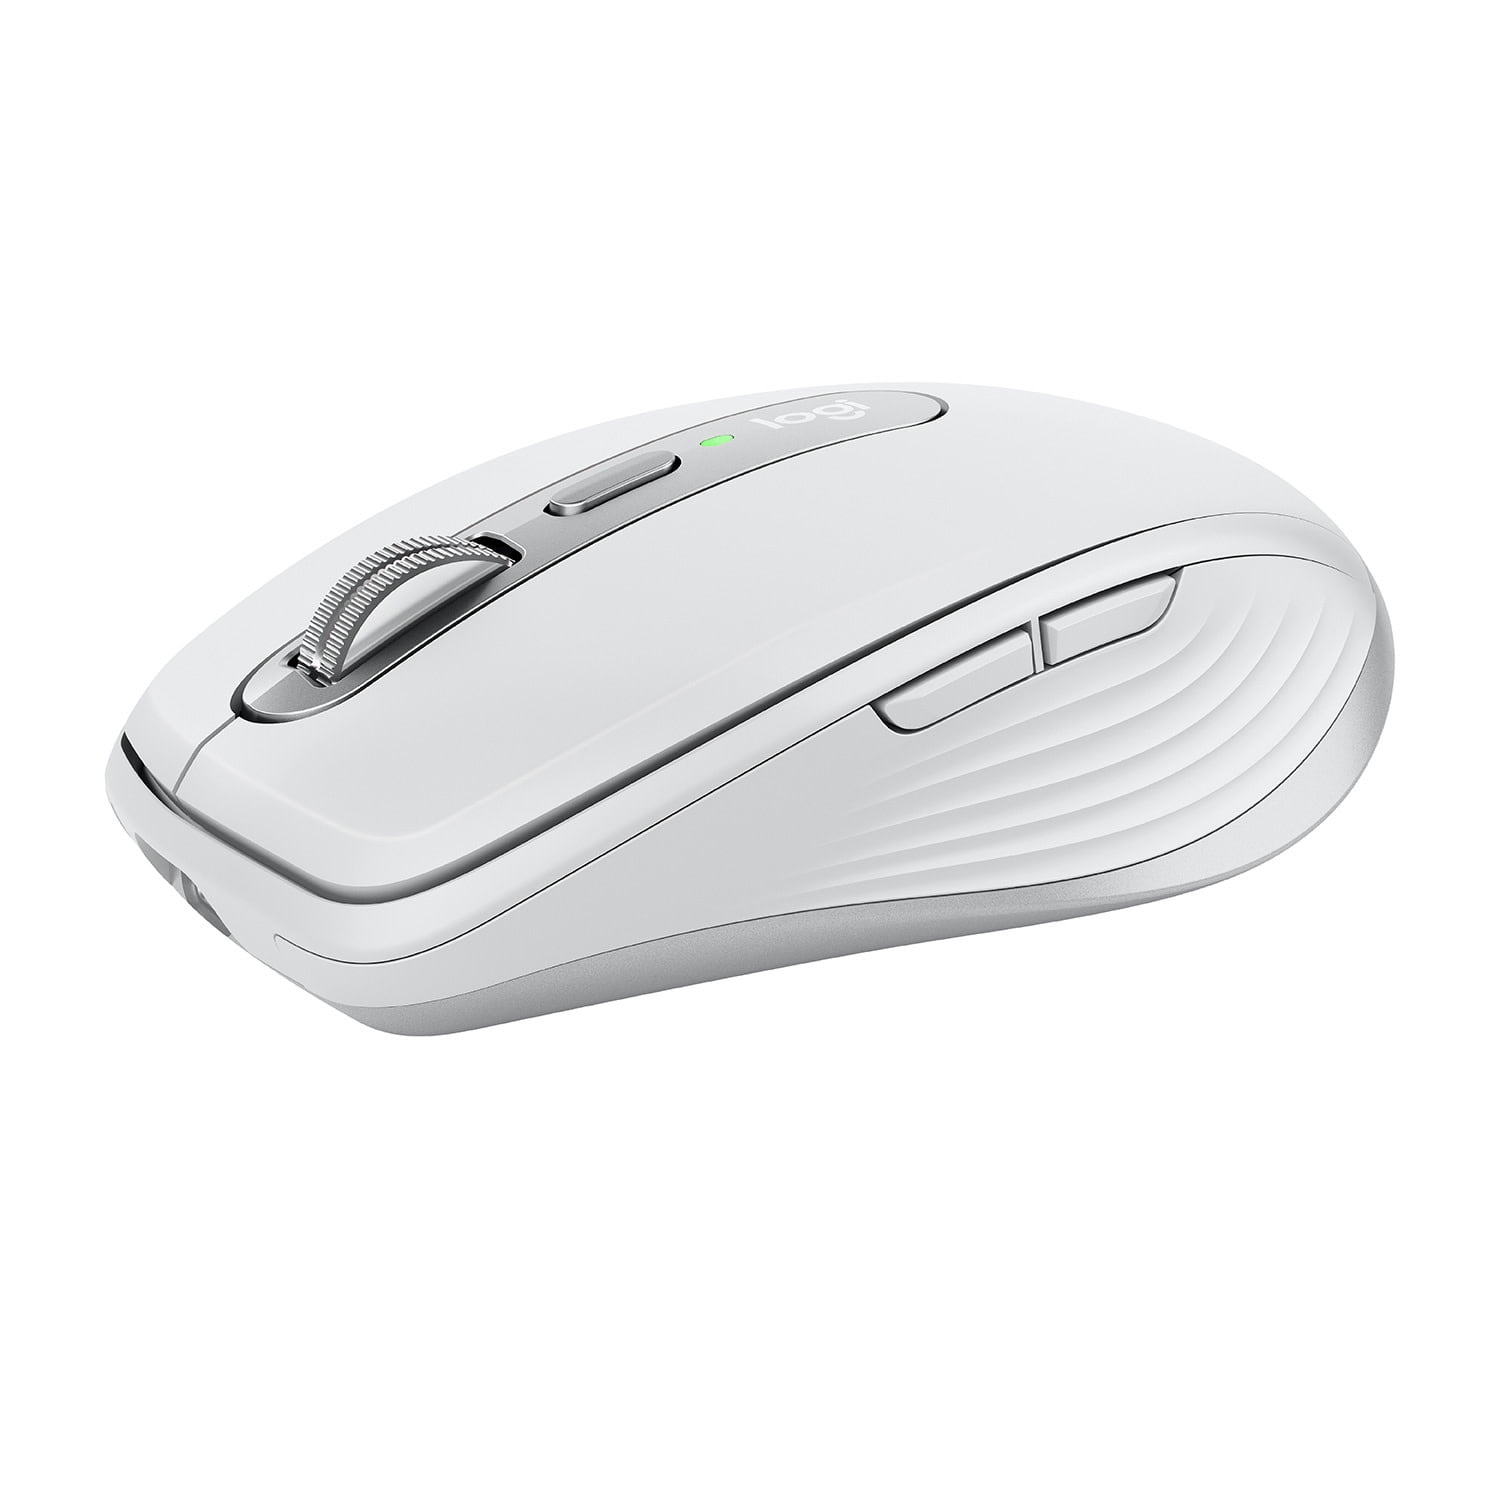 Logitech MX Anywhere 3 Compact Performance Mouse, Pale Gray 